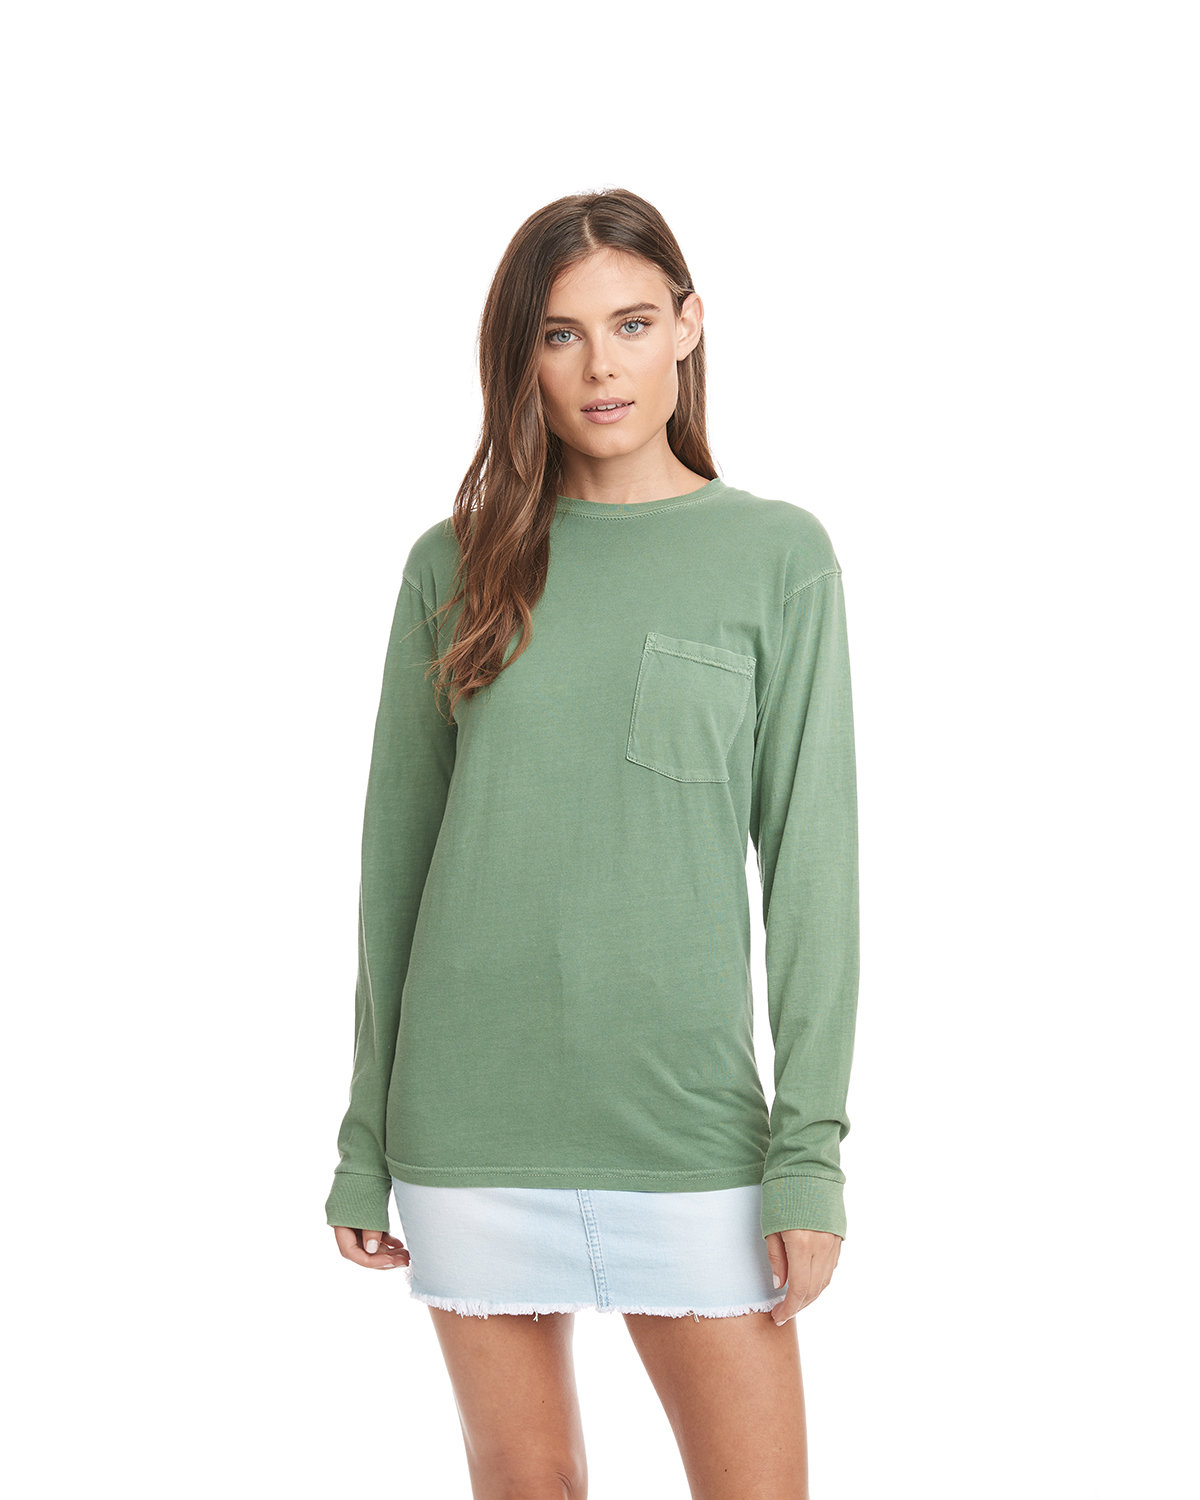 Next Level Apparel Adult Inspired Dye Long-Sleeve Crew with Pocket CLOVER 